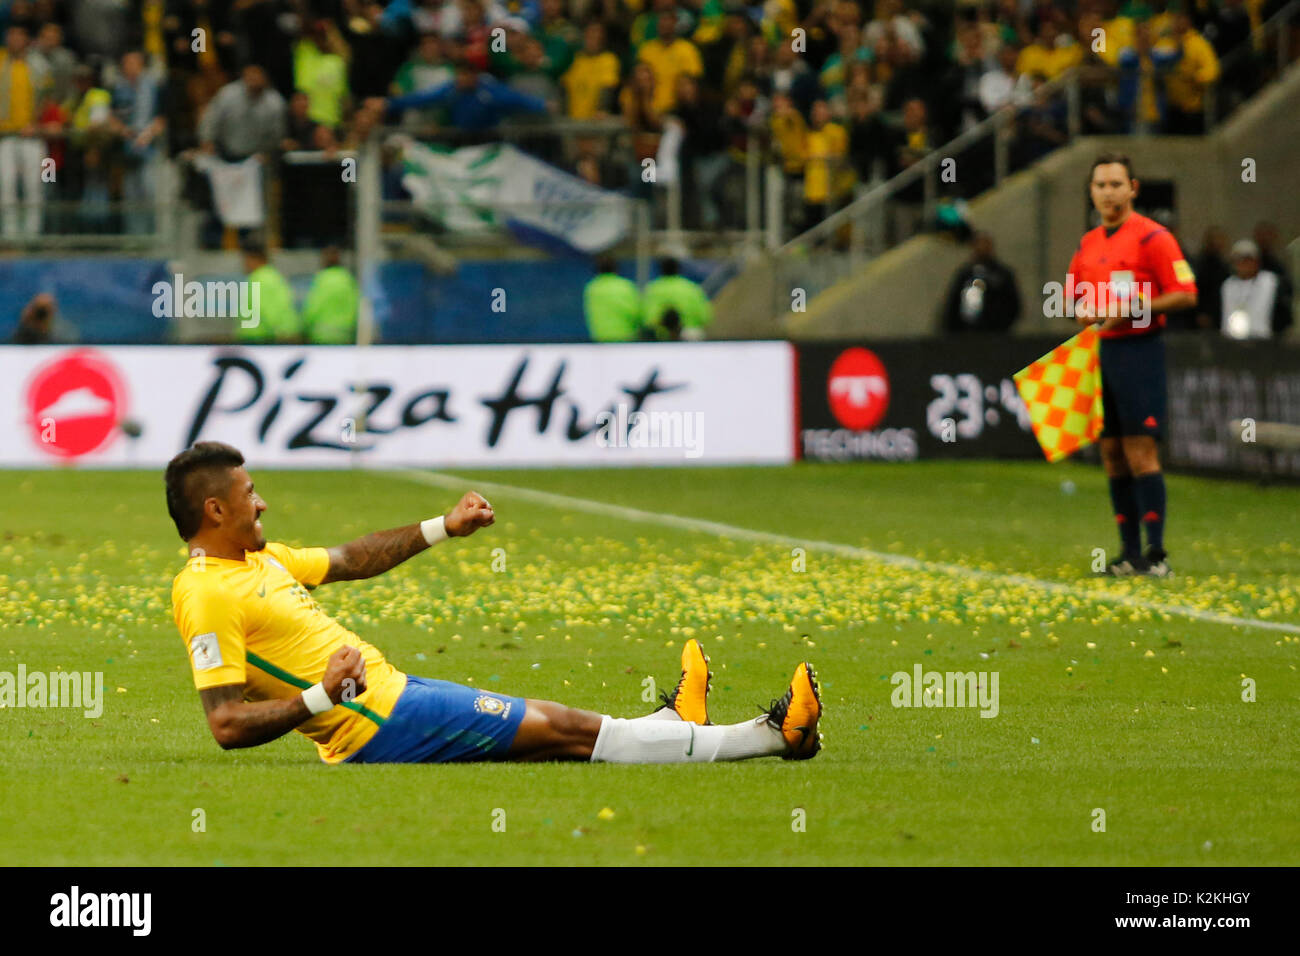 Porto Alegre, Brazil. 31st Aug, 2017. Paulinho of Brazil celebrates after scoring the first goal of his team during the match Brazil v Equador - 2018 FIFA World Cup Russia Qualifier, at Arena do Gremio on August 31, 2017, in Porto Alegre, Brazil. (PHOTO: PAULO LISBOA/BRAZIL PHOTO PRESS) Stock Photo